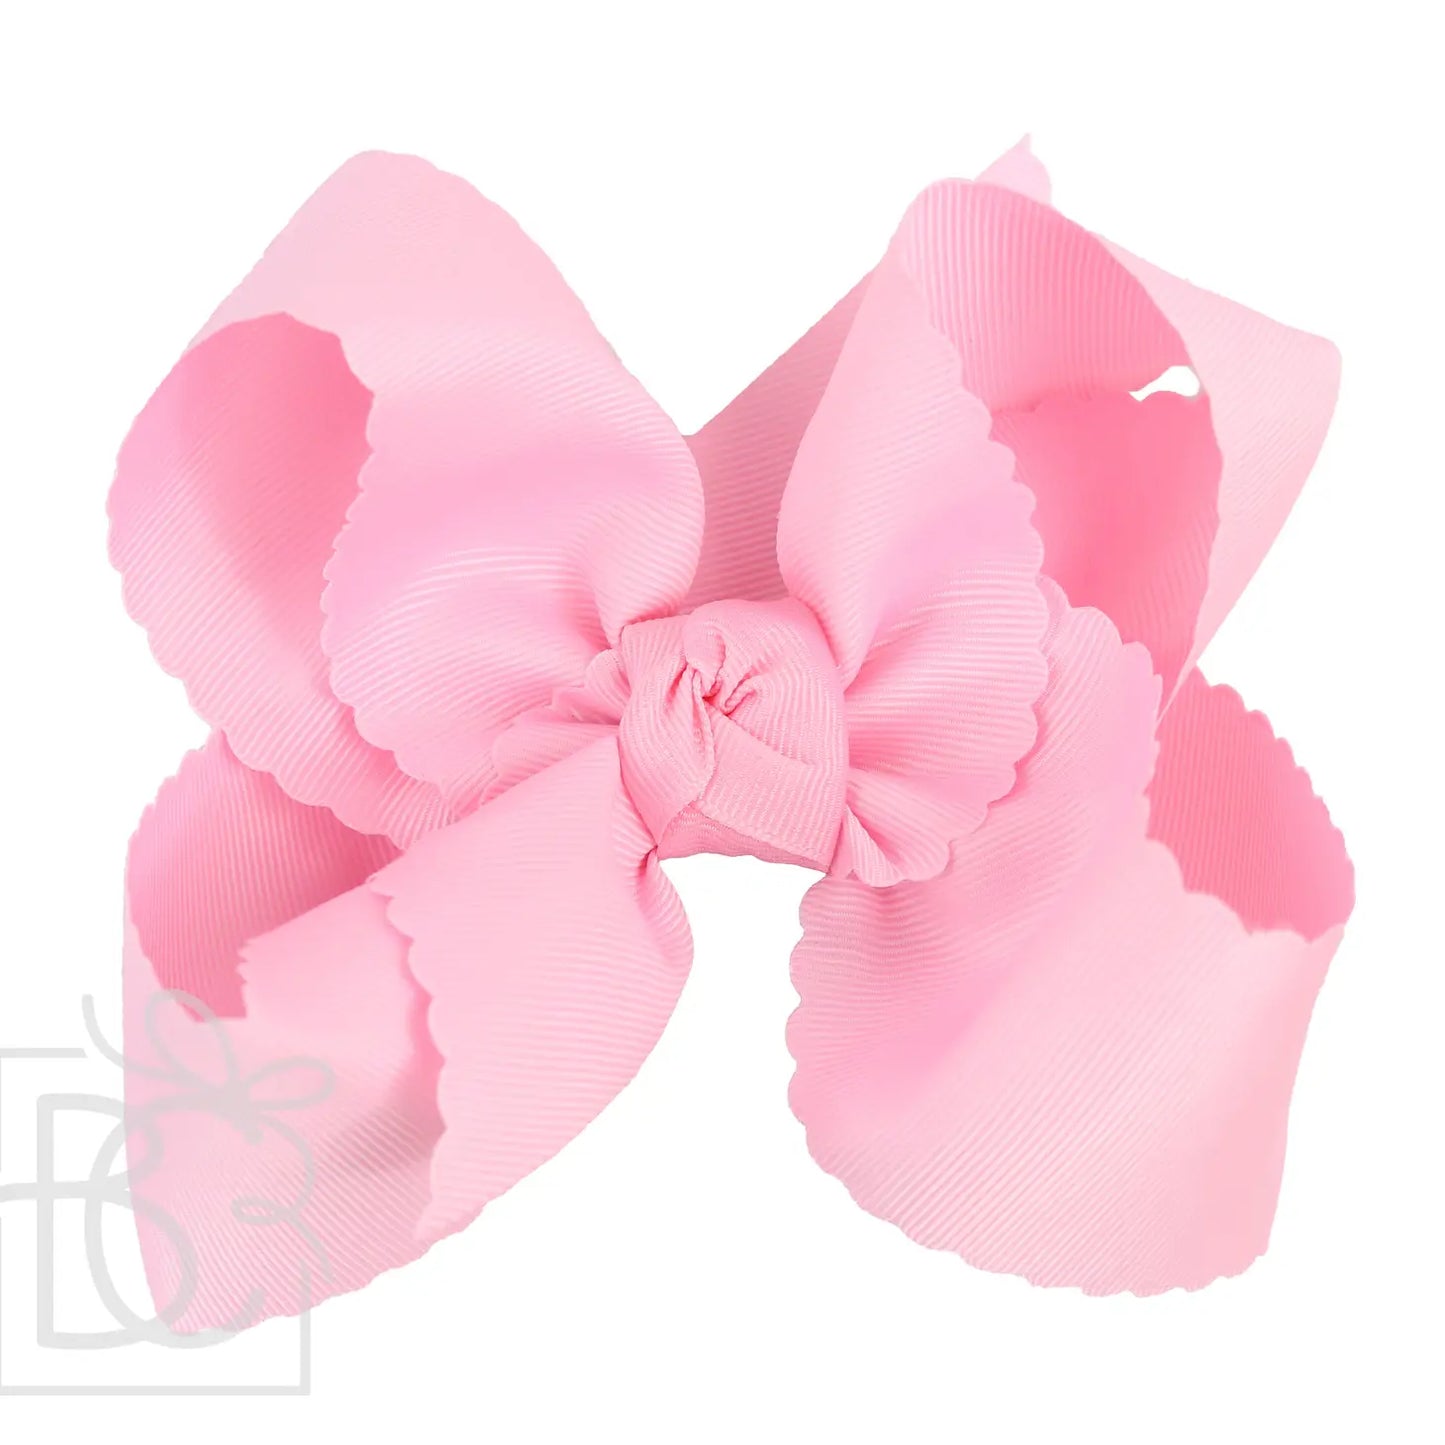 XL Scalloped Edge Bow in Pink  - Doodlebug's Children's Boutique